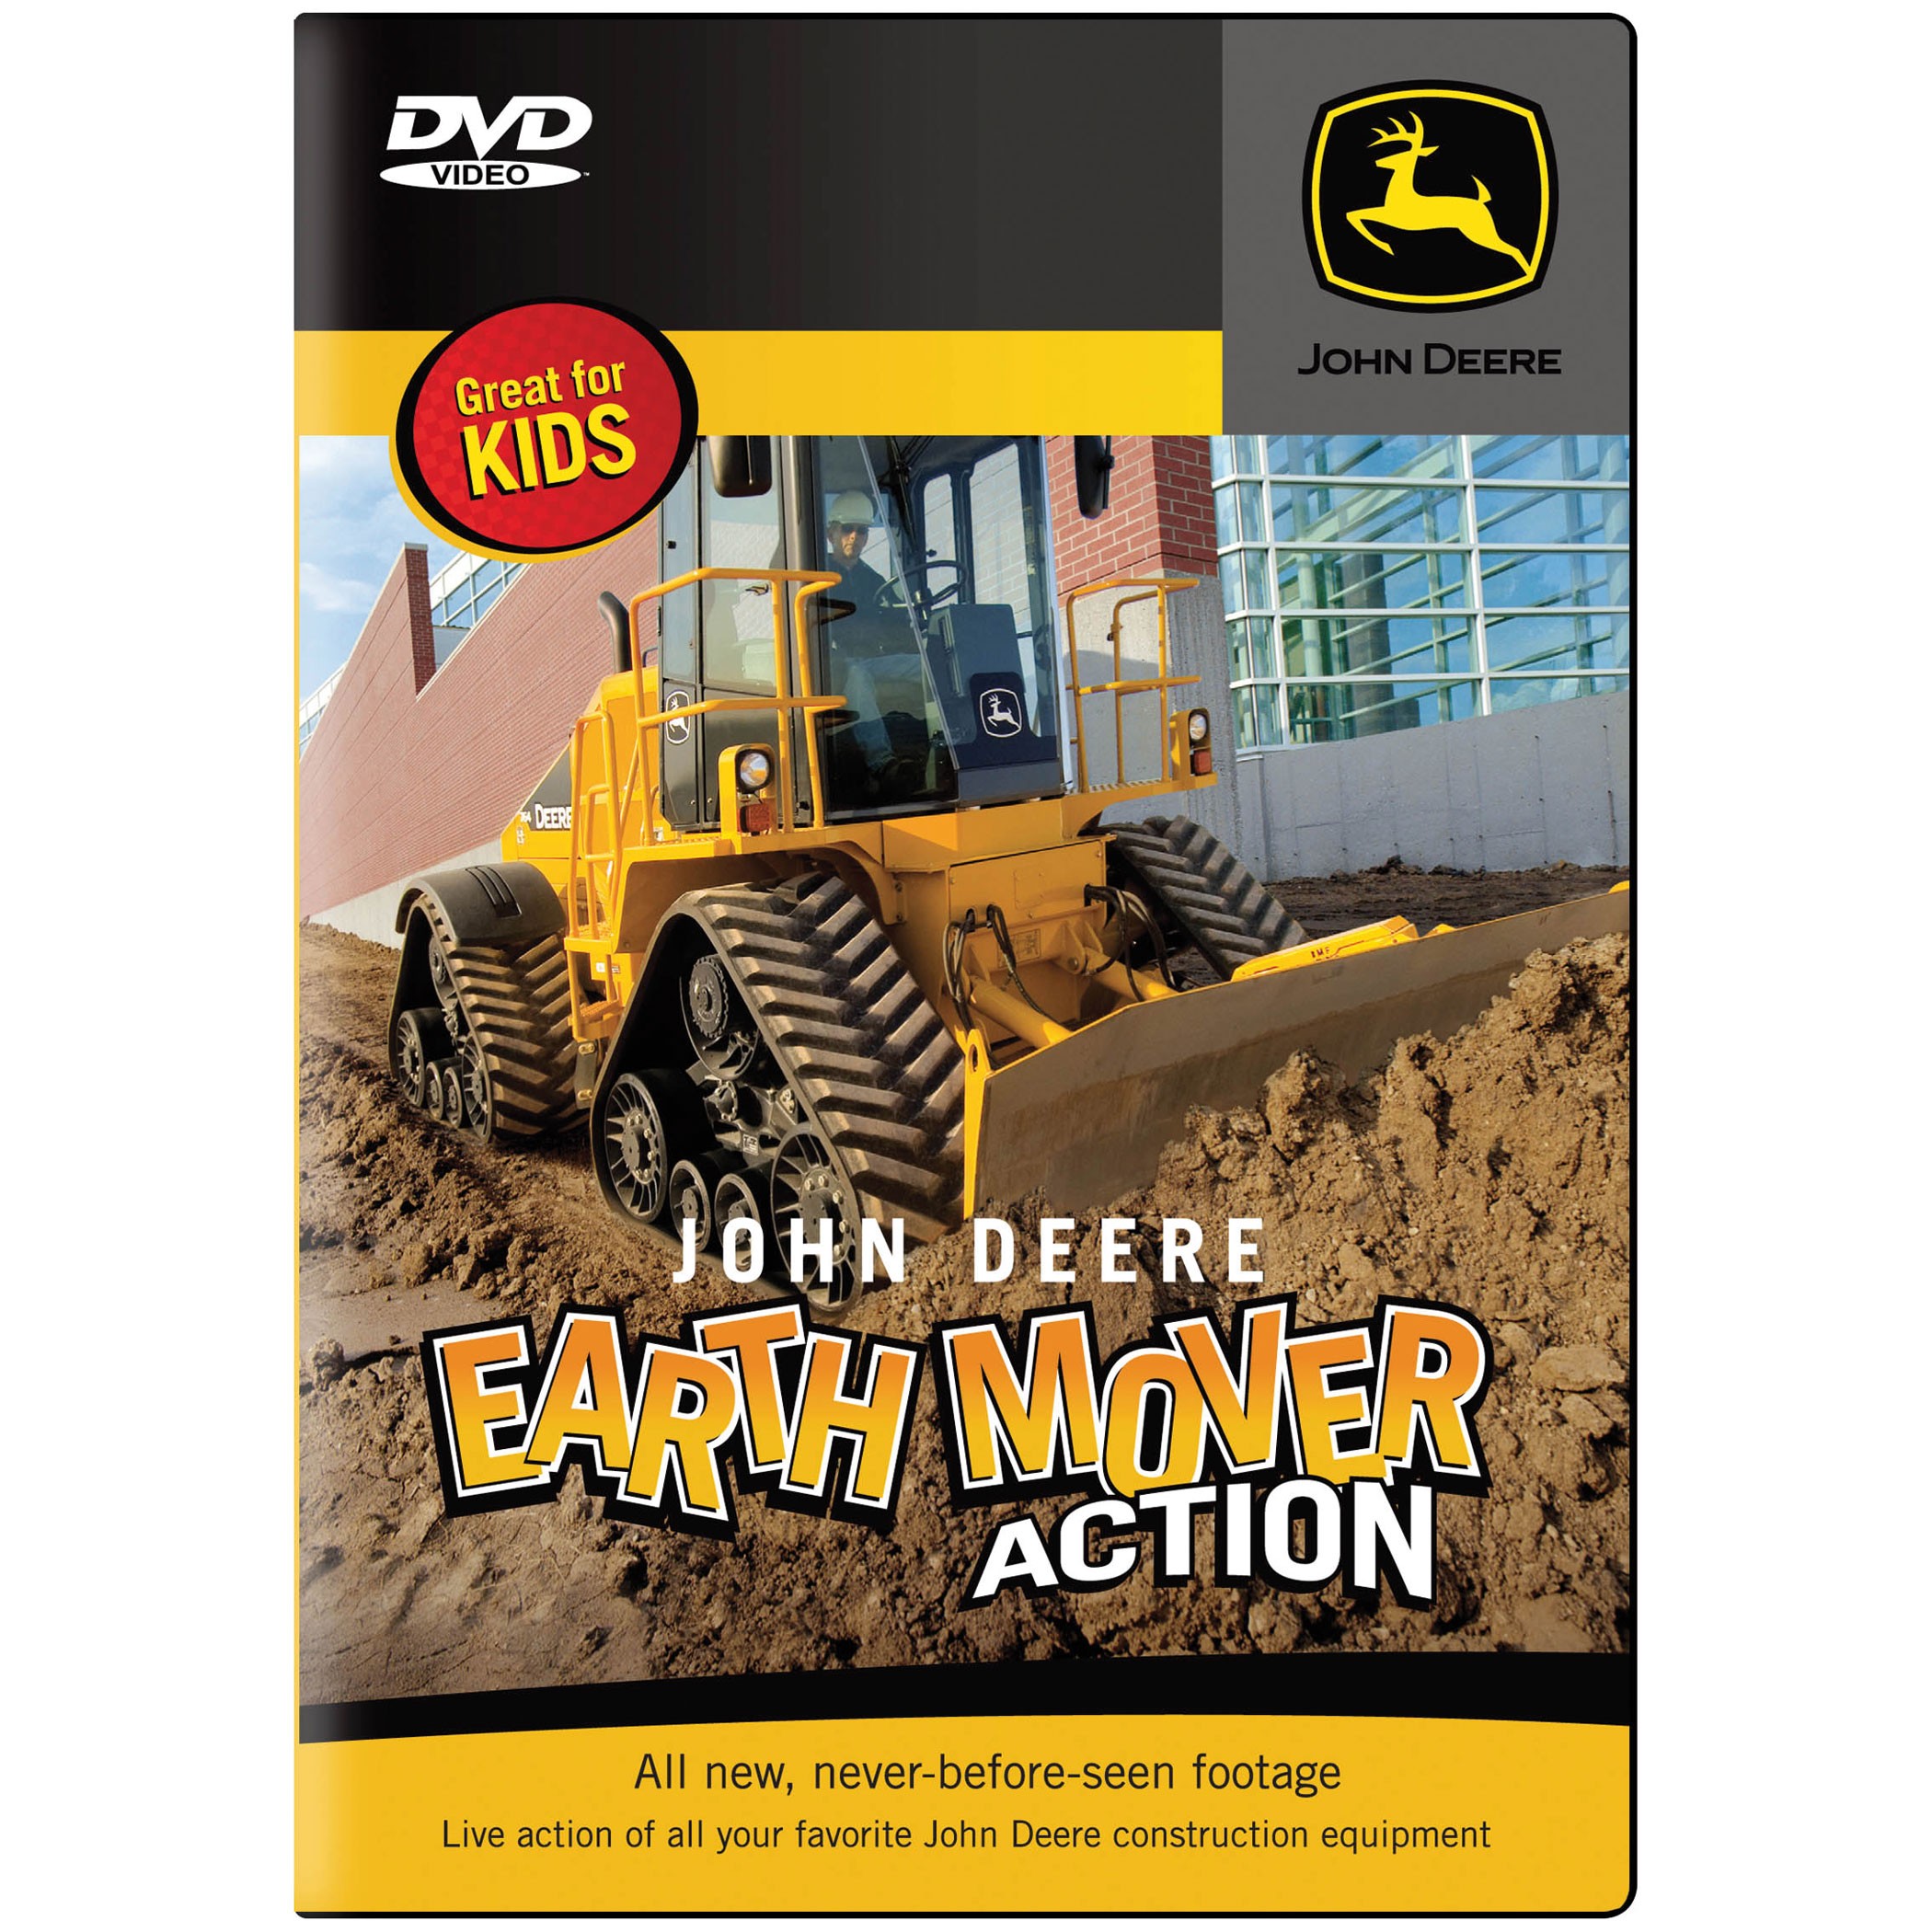 ... load rocks, and climb hills on the John Deere Earth Mover Action DVD